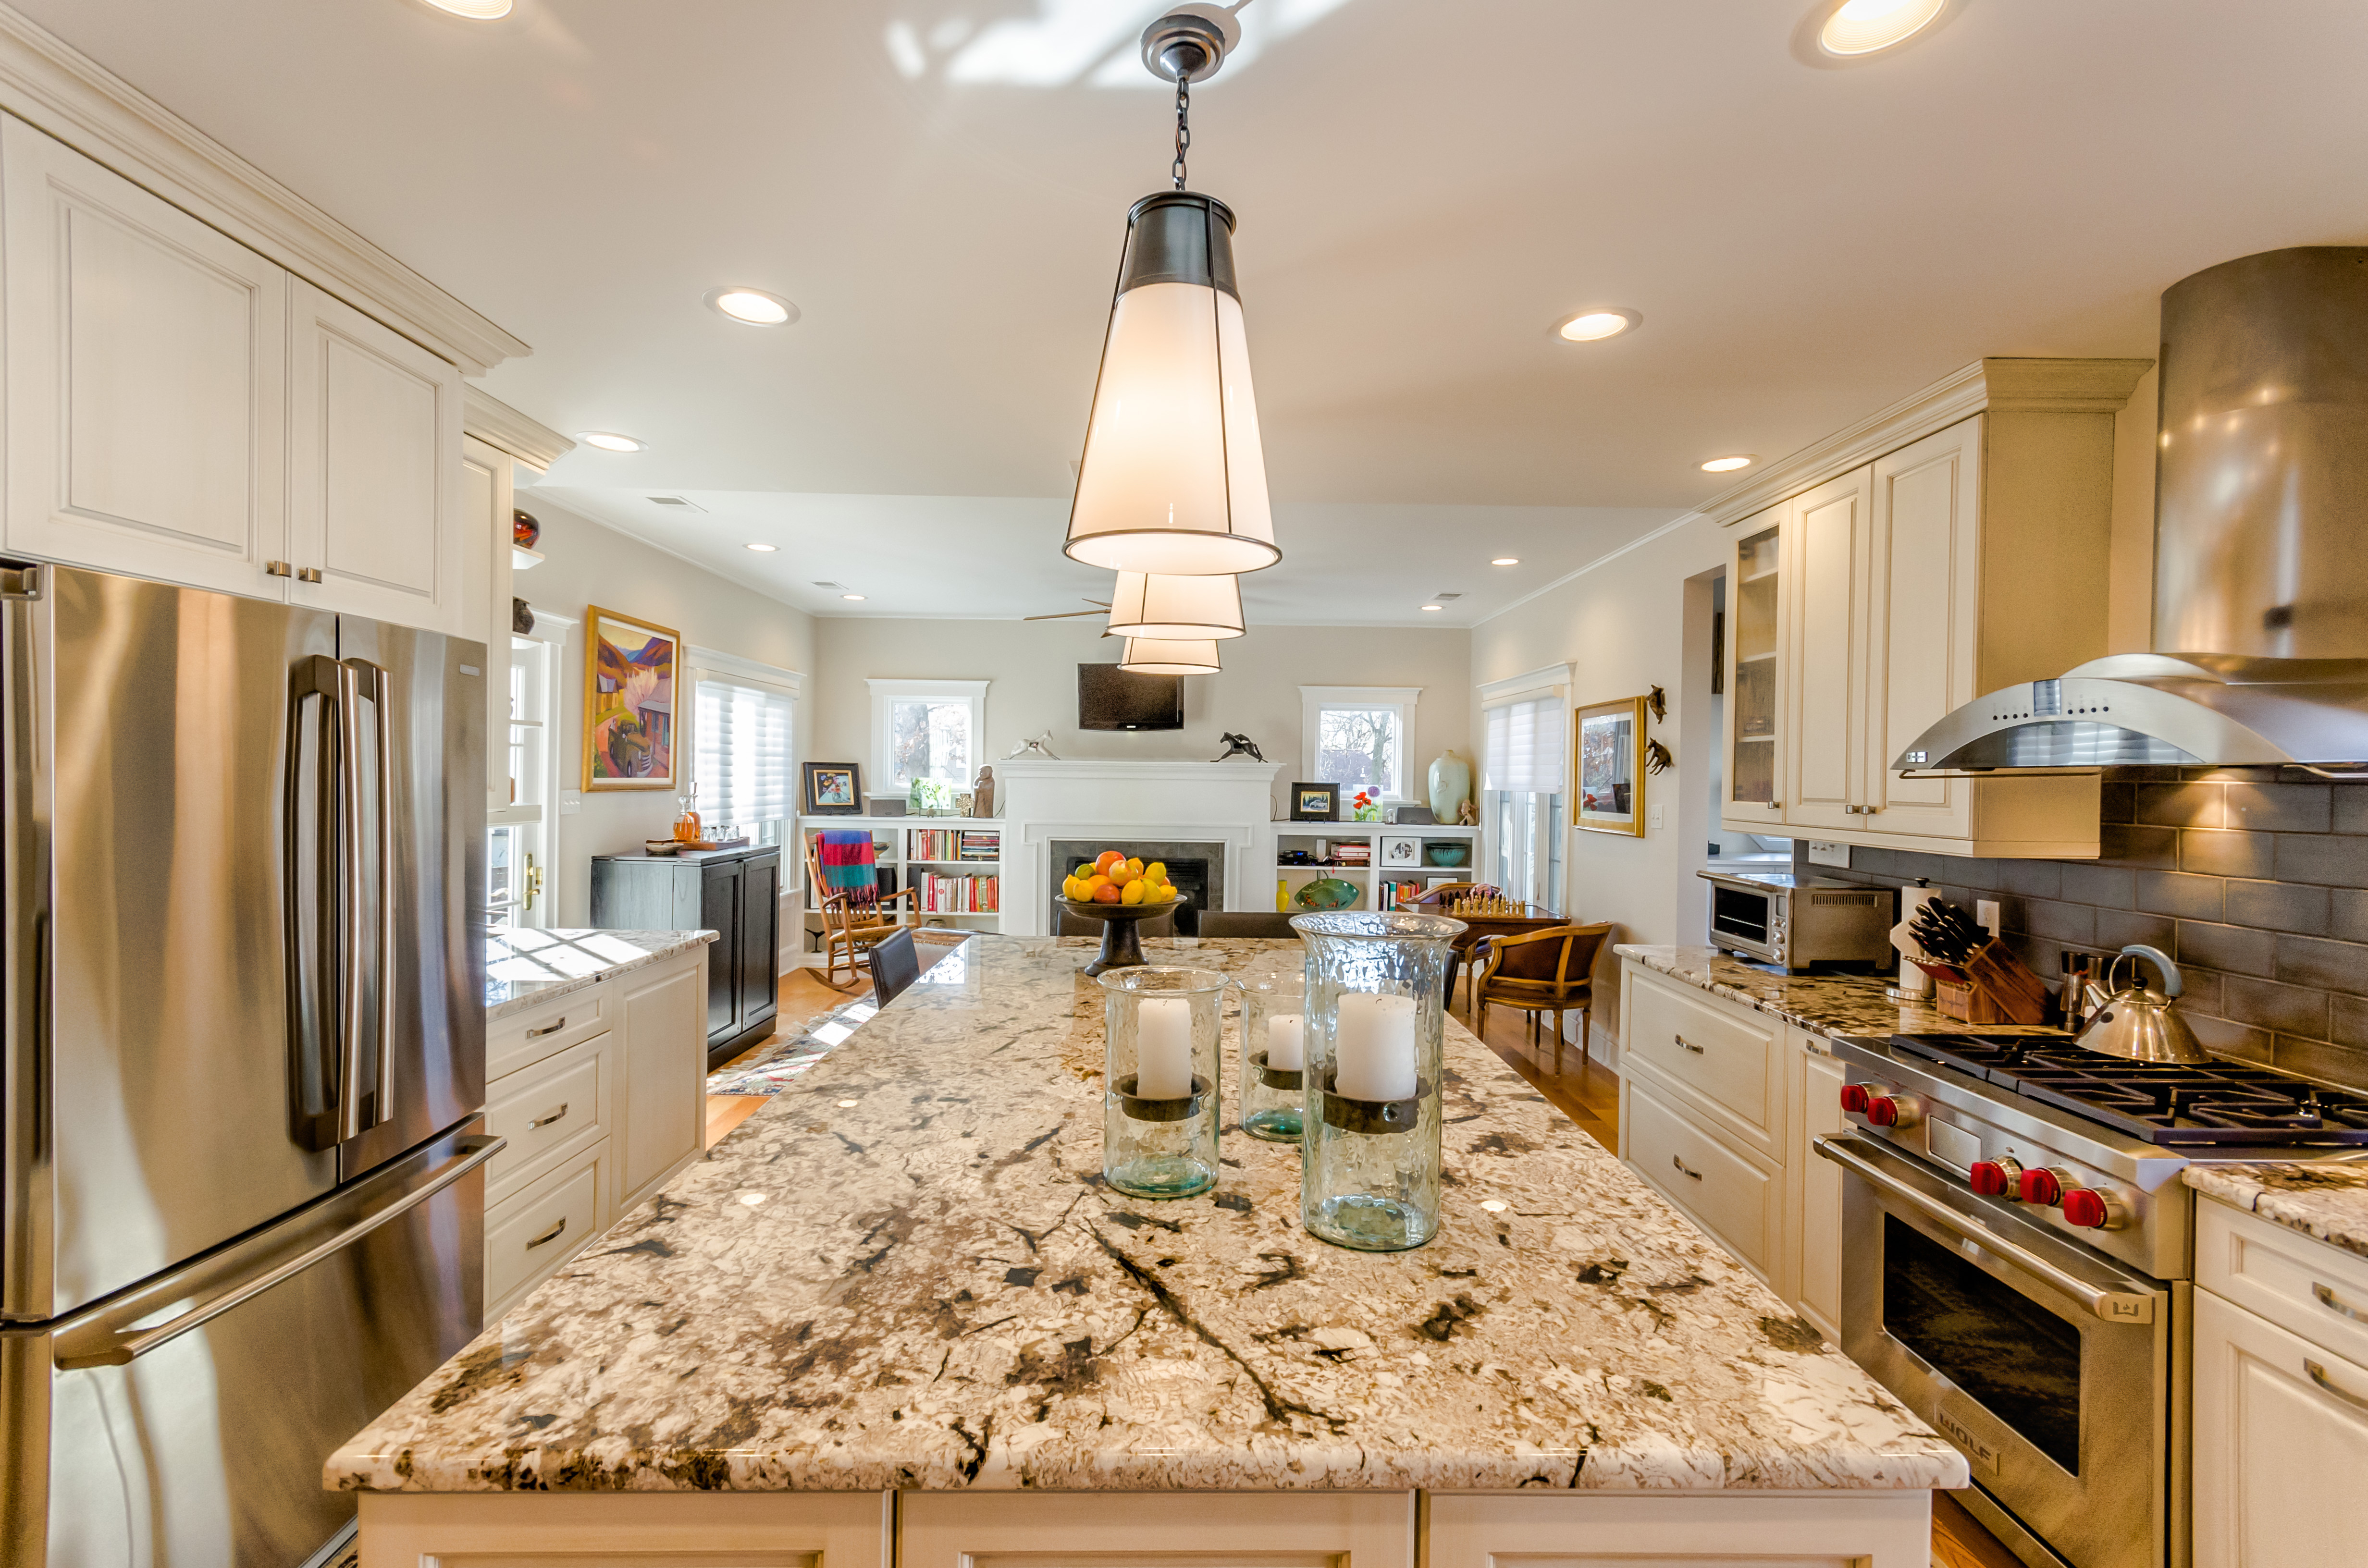 Webster Groves kitchen island countertop